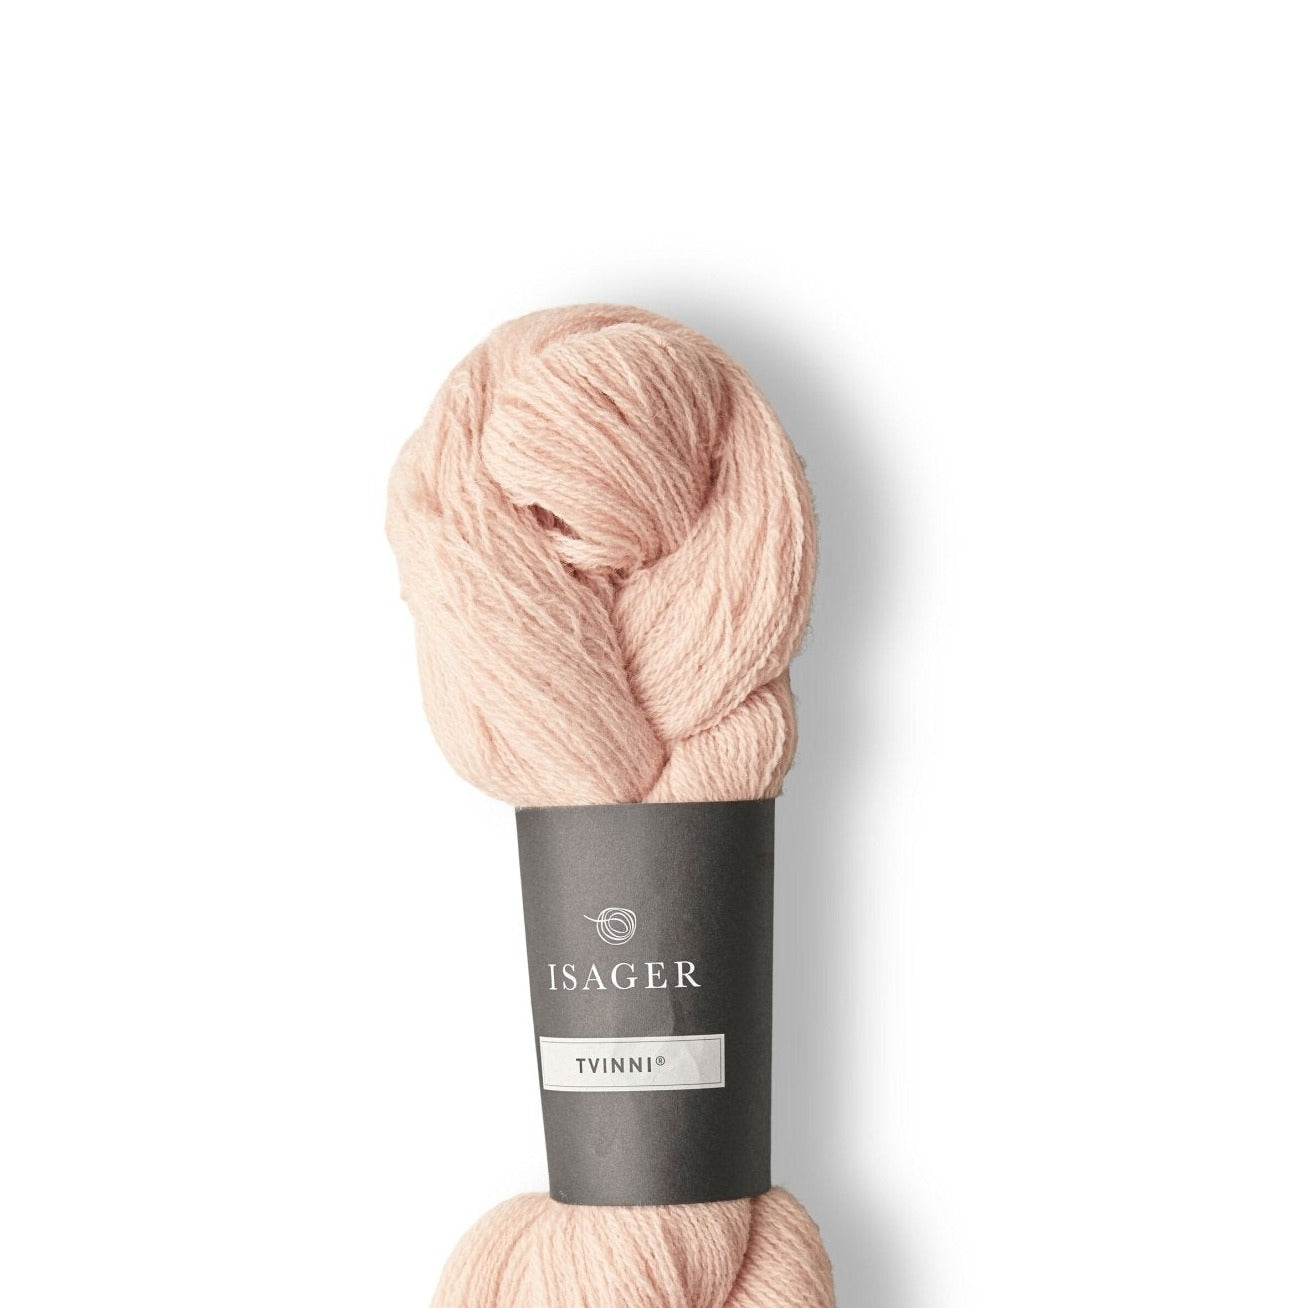 Isager Tvinni - 61 - 4 Ply - Isager - The Little Yarn Store